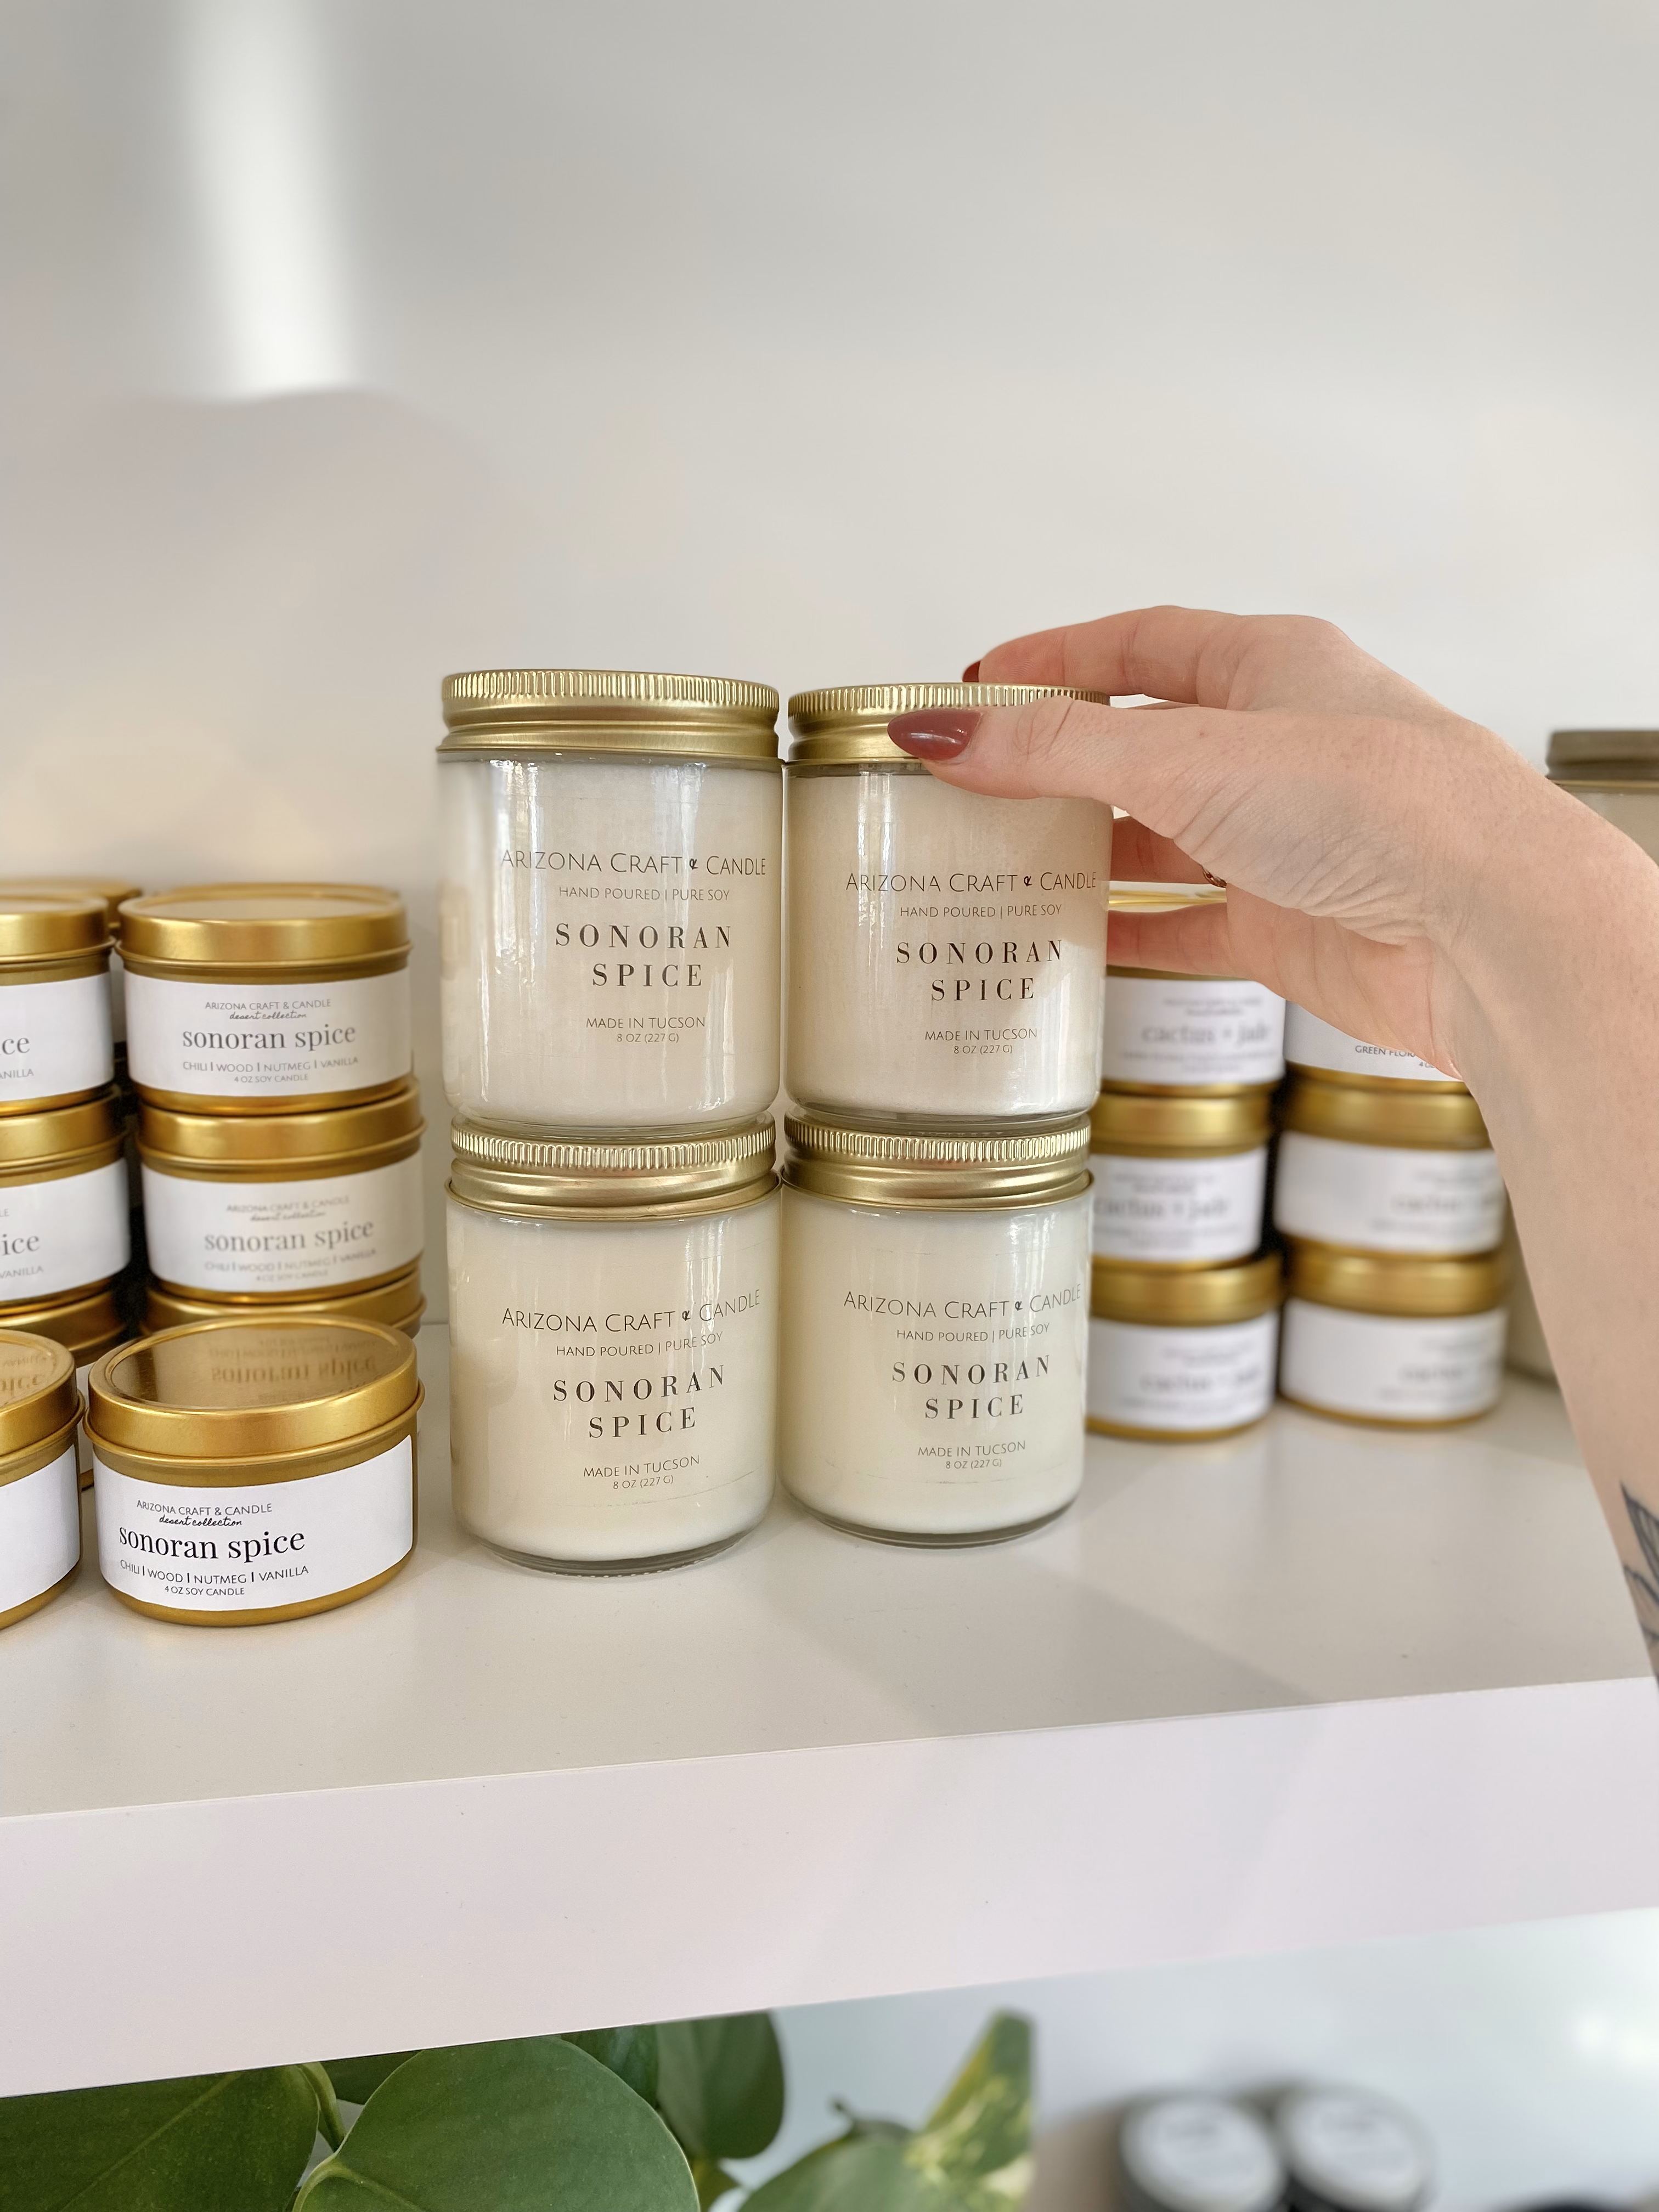 Person reaching for a sonoran spice candle on a shelf